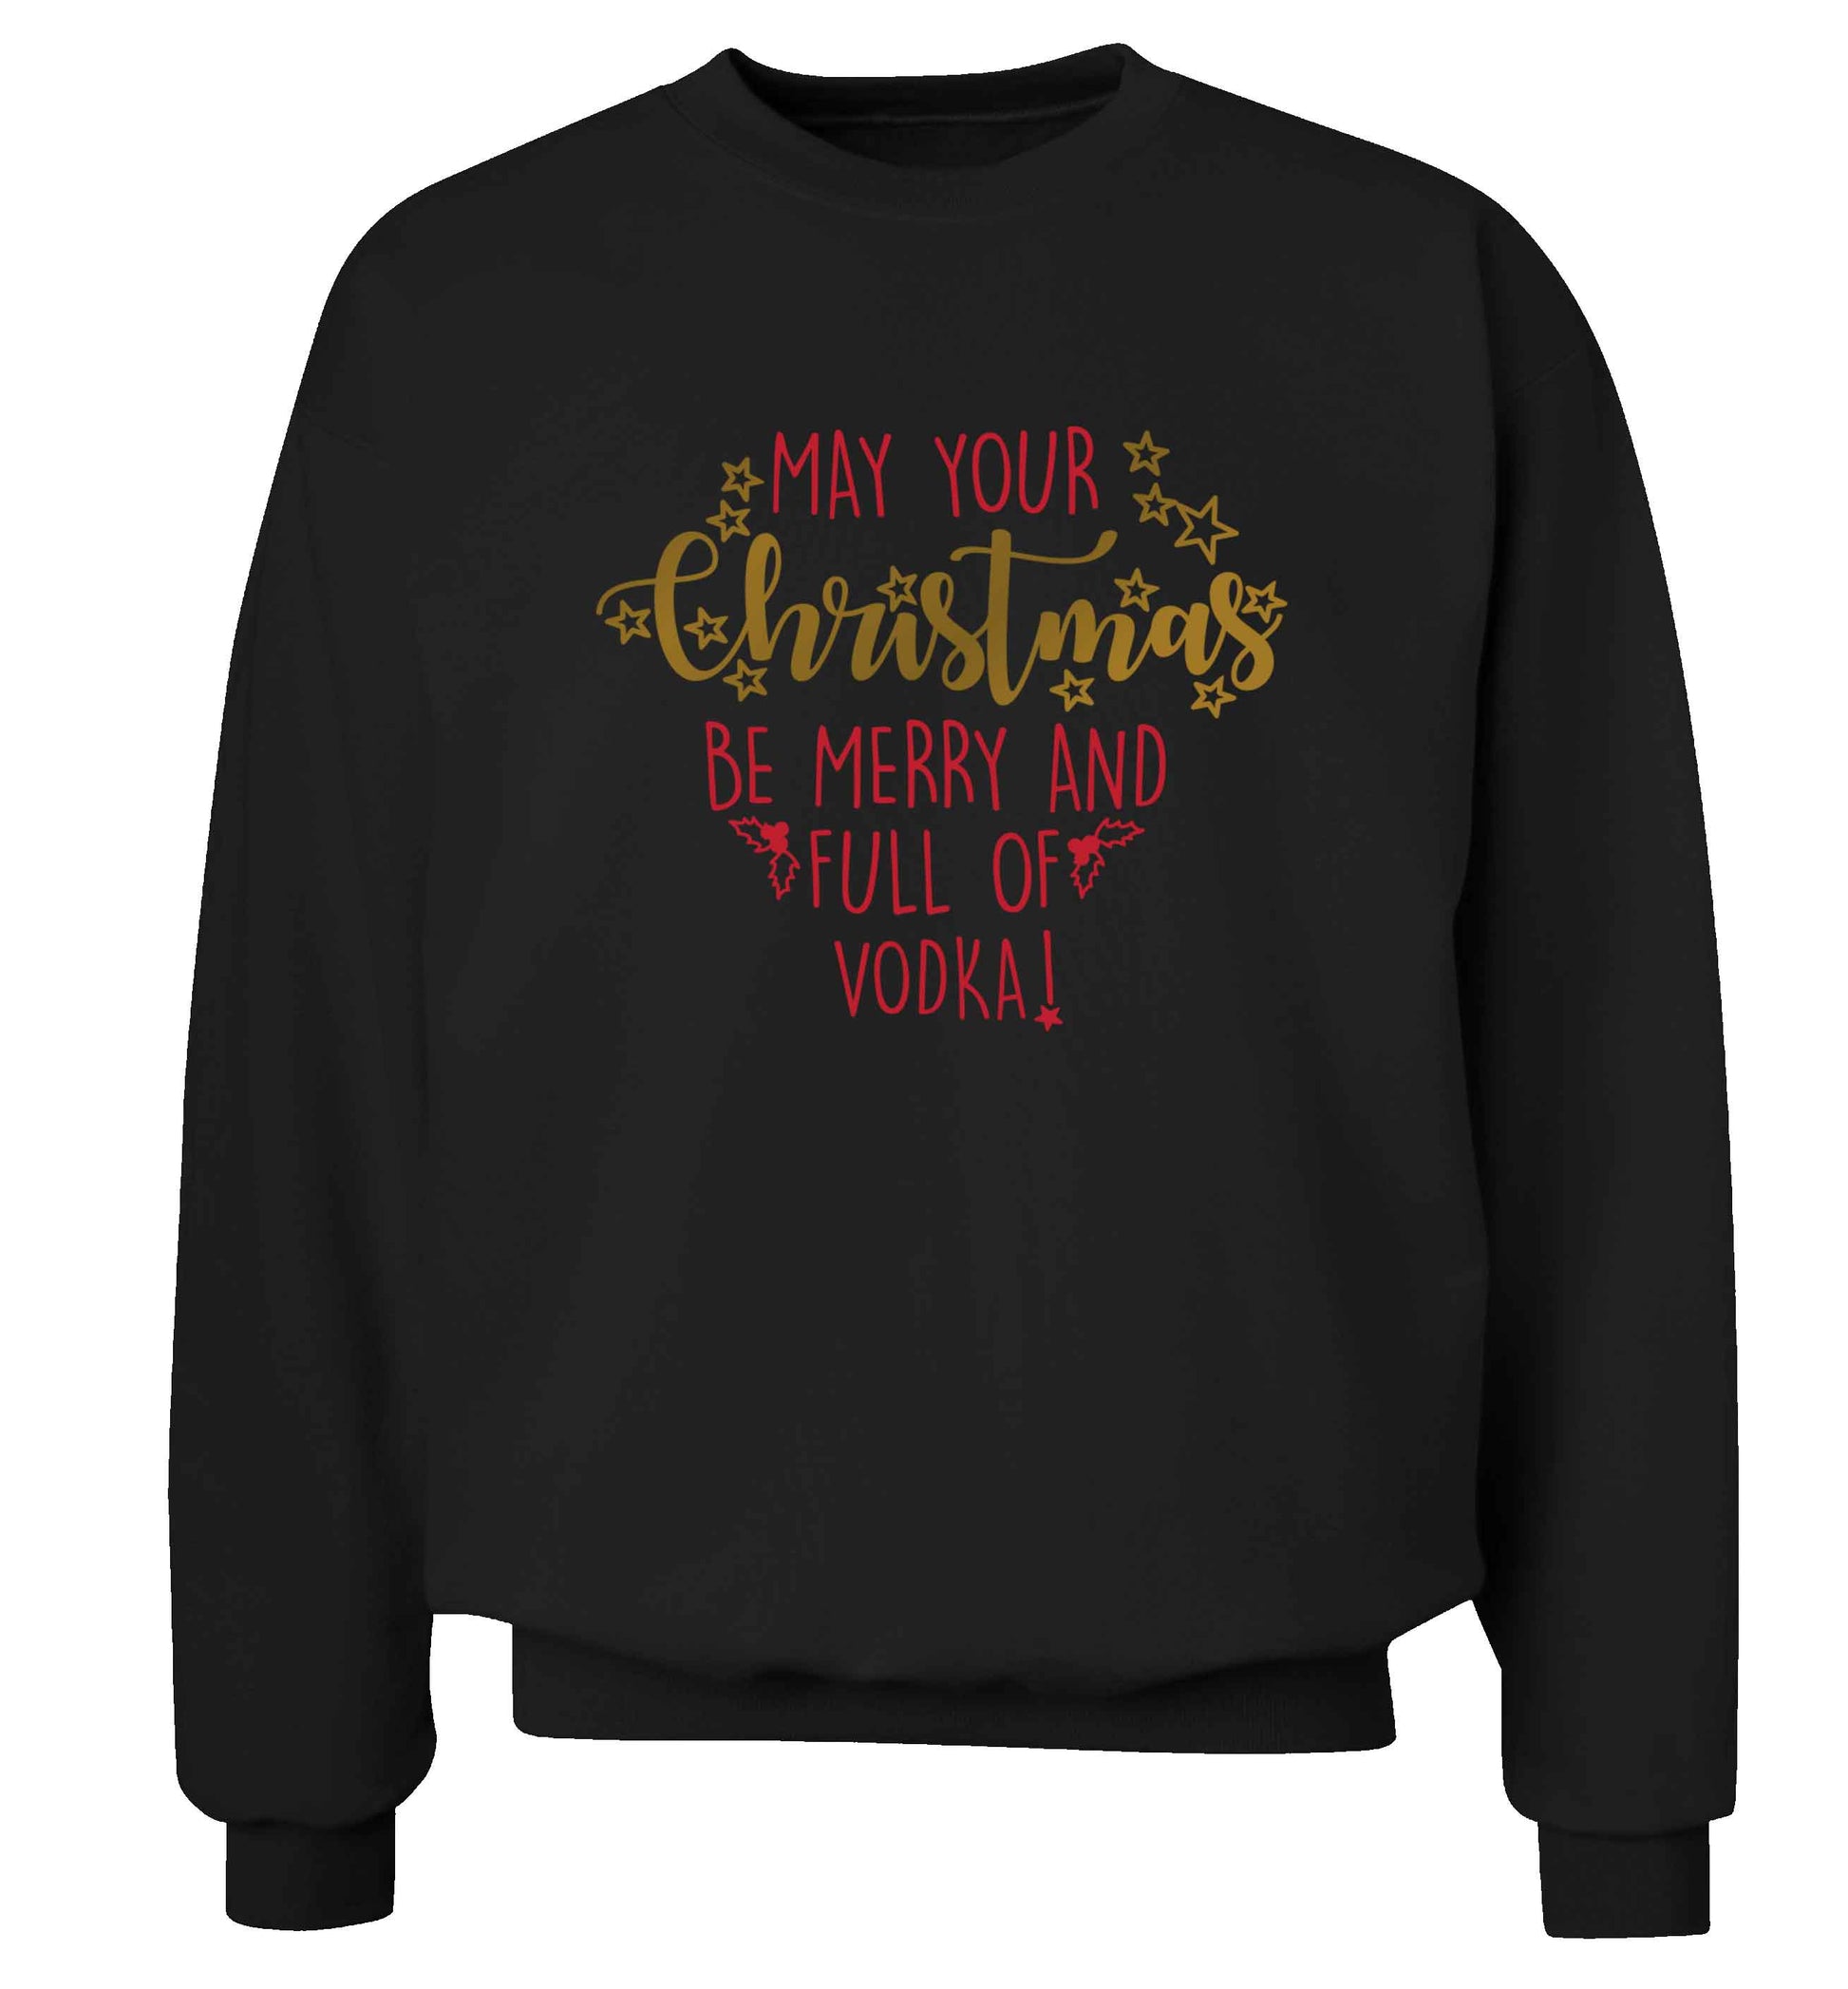 May your Christmas be merry and full of vodka Adult's unisex black Sweater 2XL